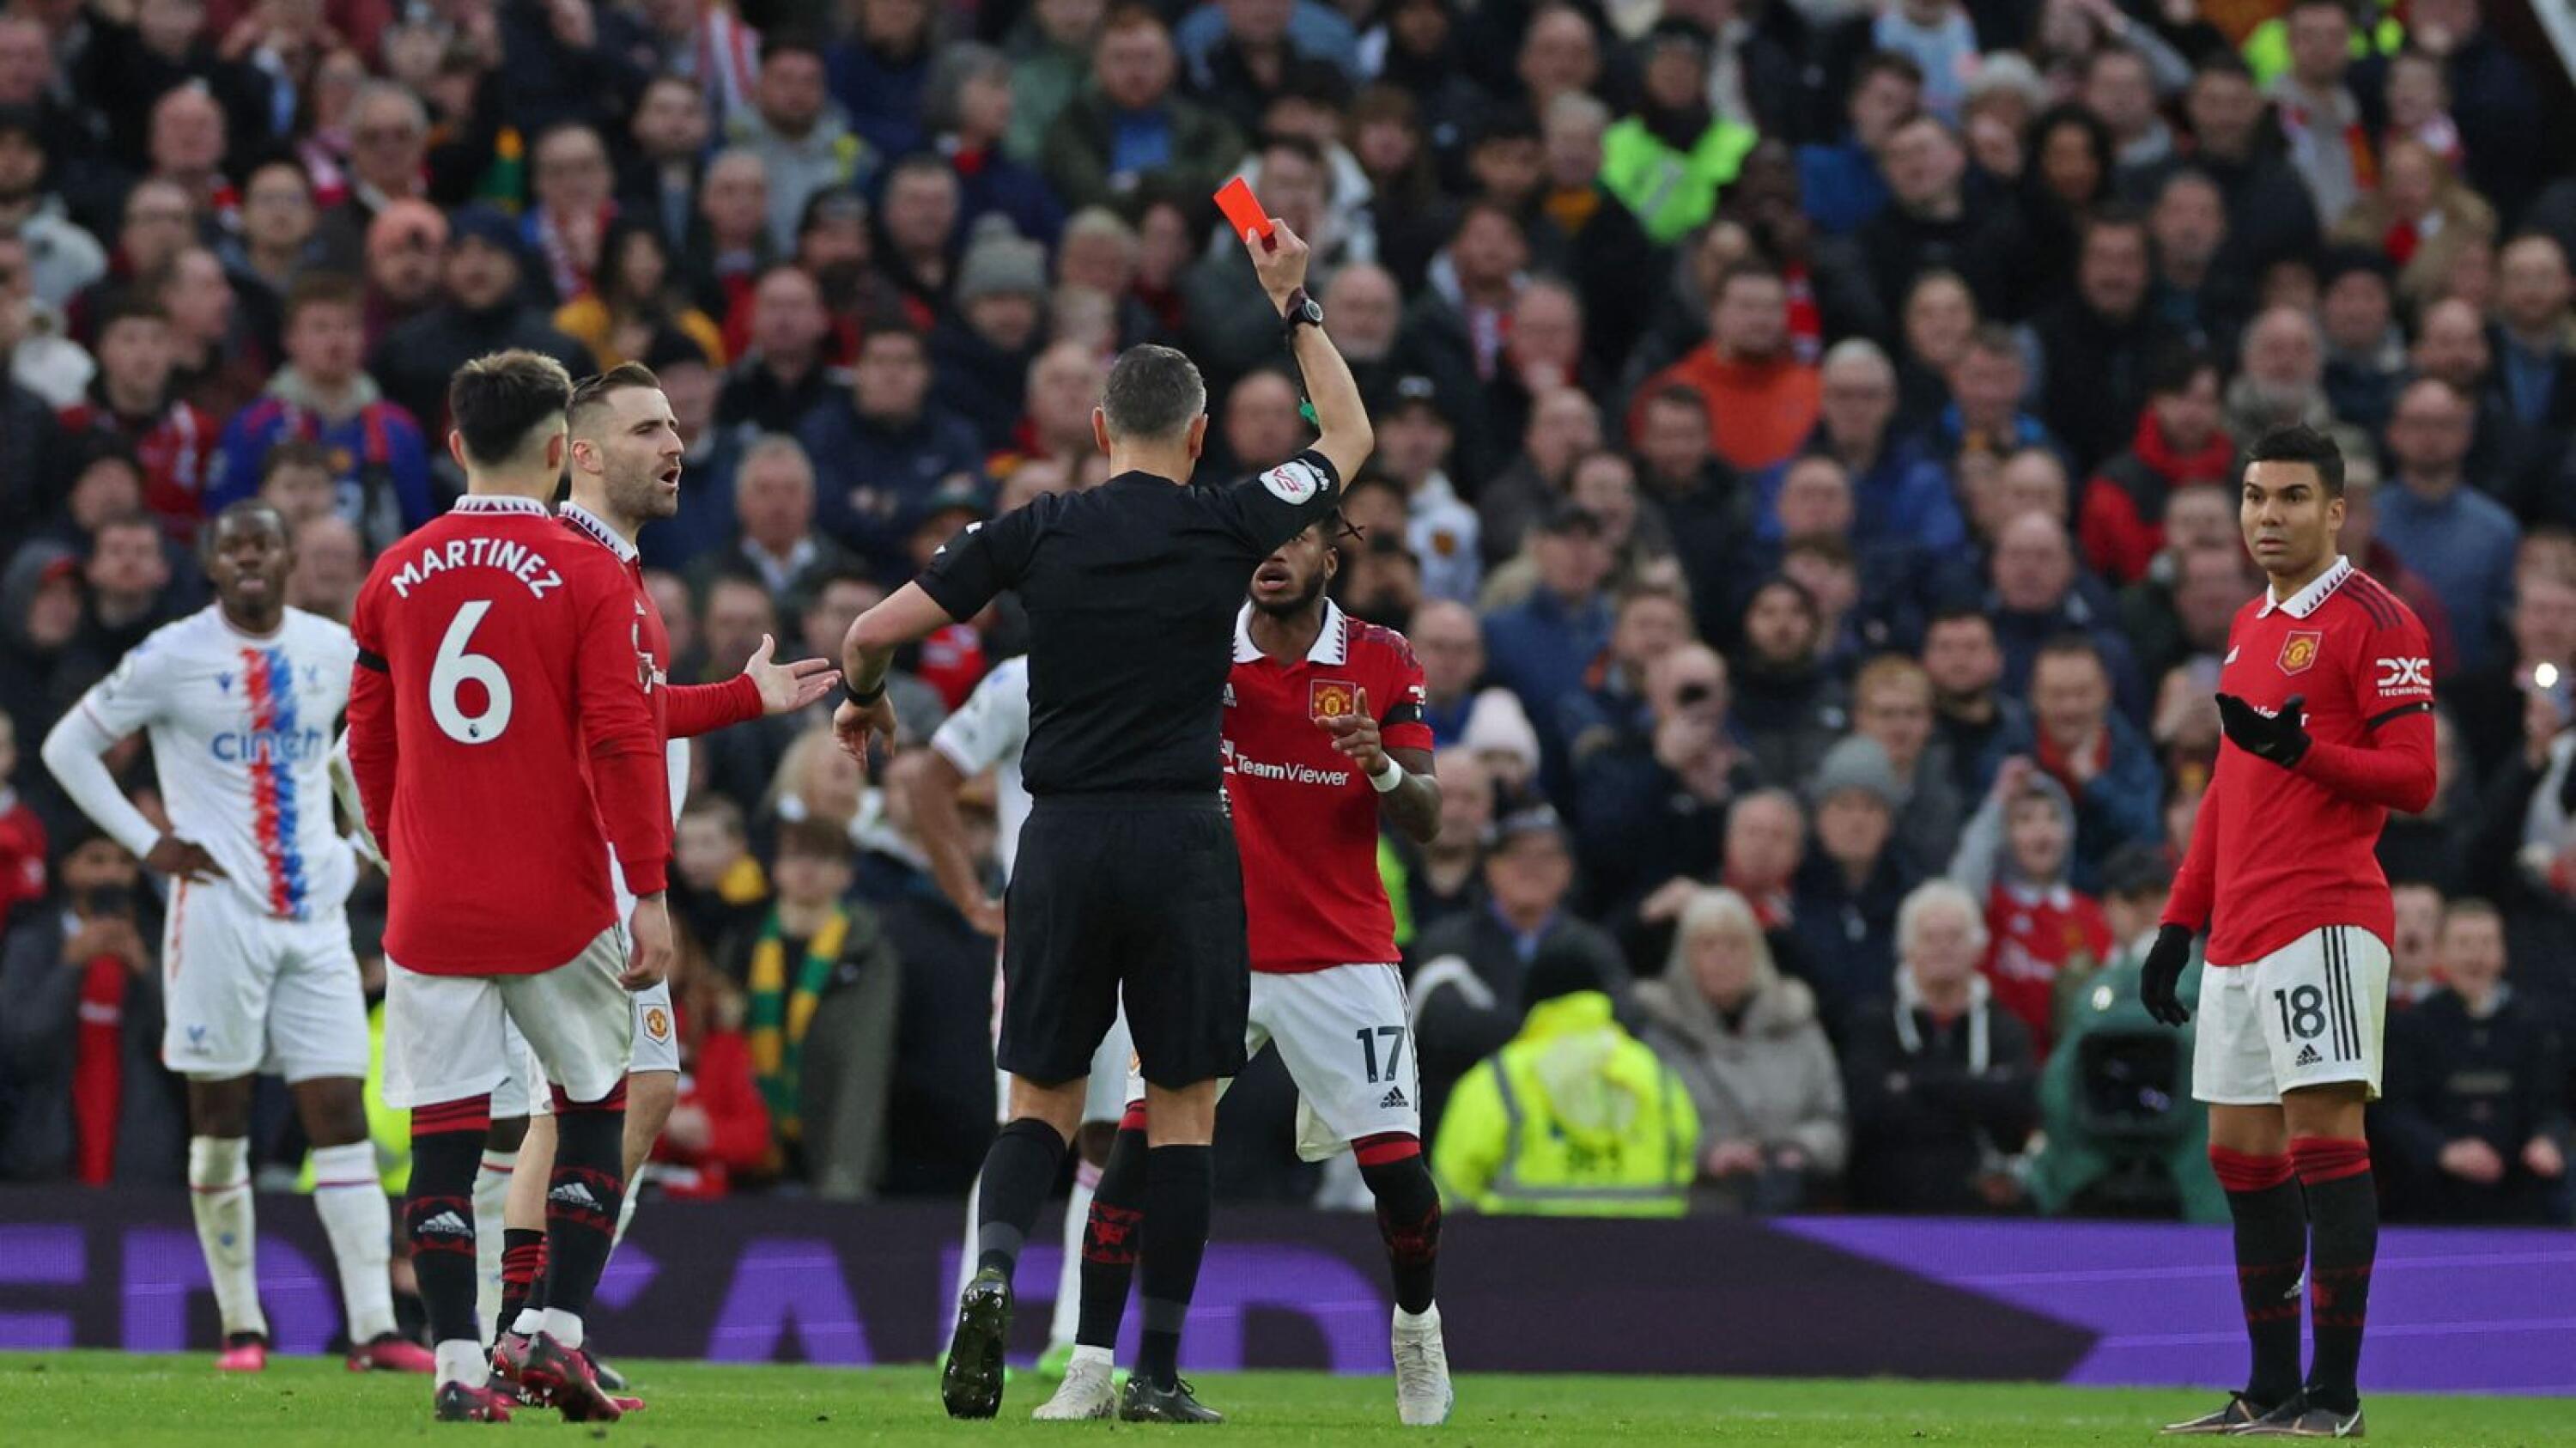 Manchester United's Casemiro is shown a red card by referee Andre Marriner during their Premier League game against Crystal Palace at Old Trafford in Manchester on Saturday